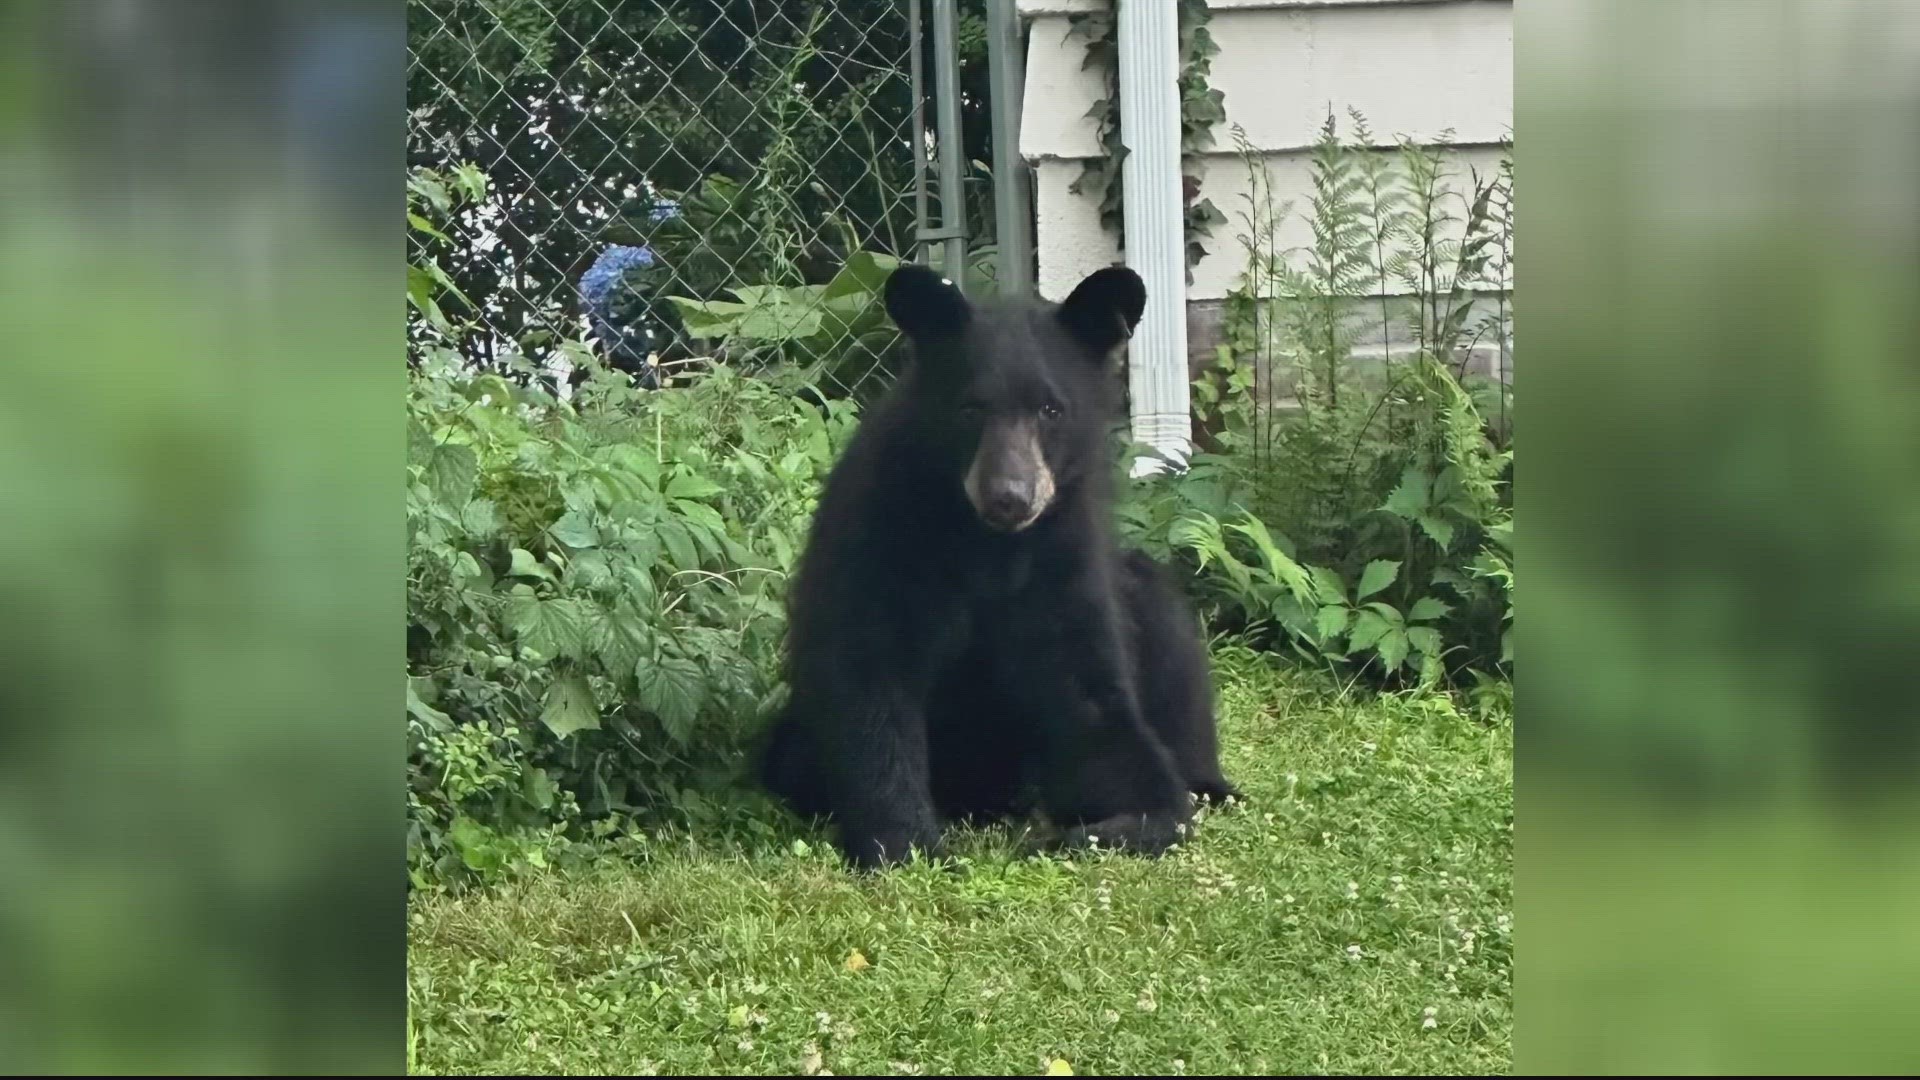 Arlington neighbors have reported seeing a juvenile black bear in the Windy Run Park area of the county starting on Monday.